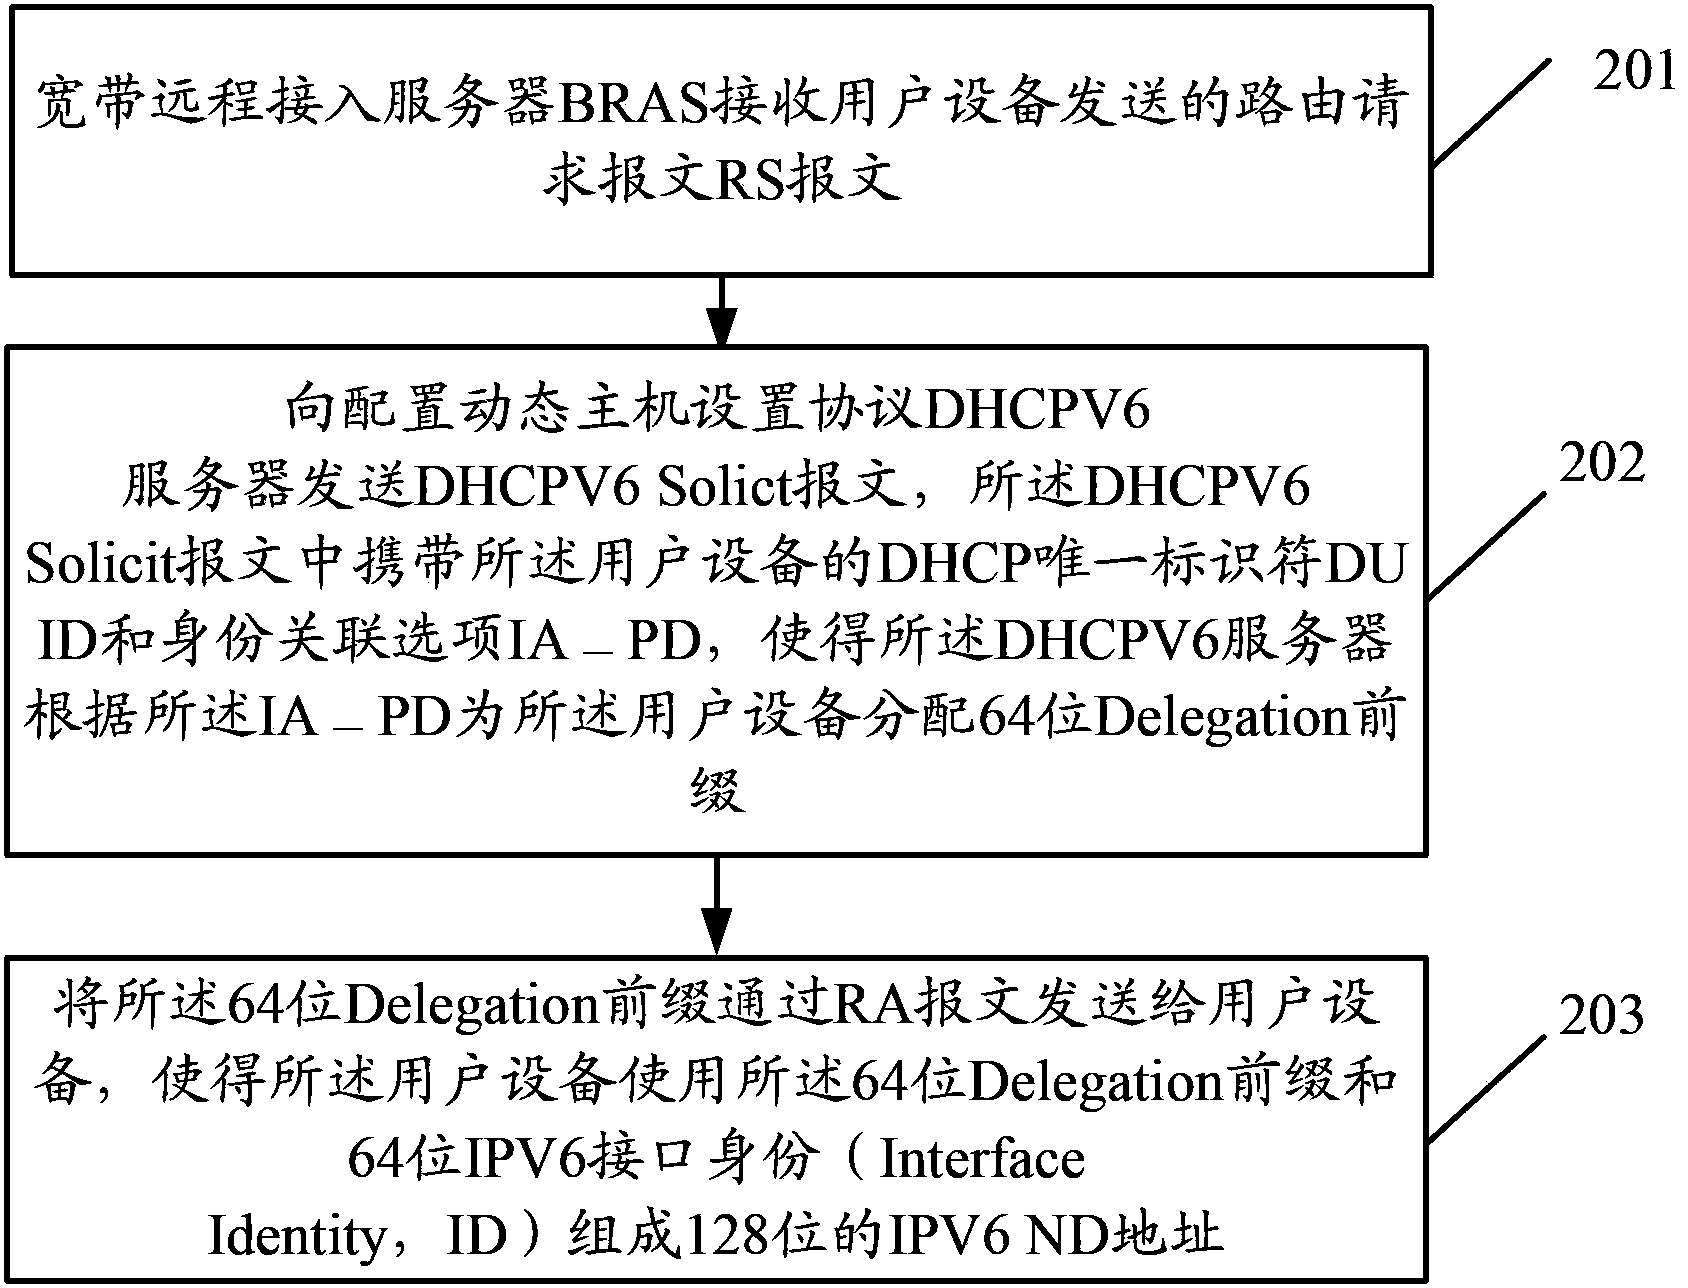 Method for obtaining IPV6ND address and broadband remote access server (BARS)